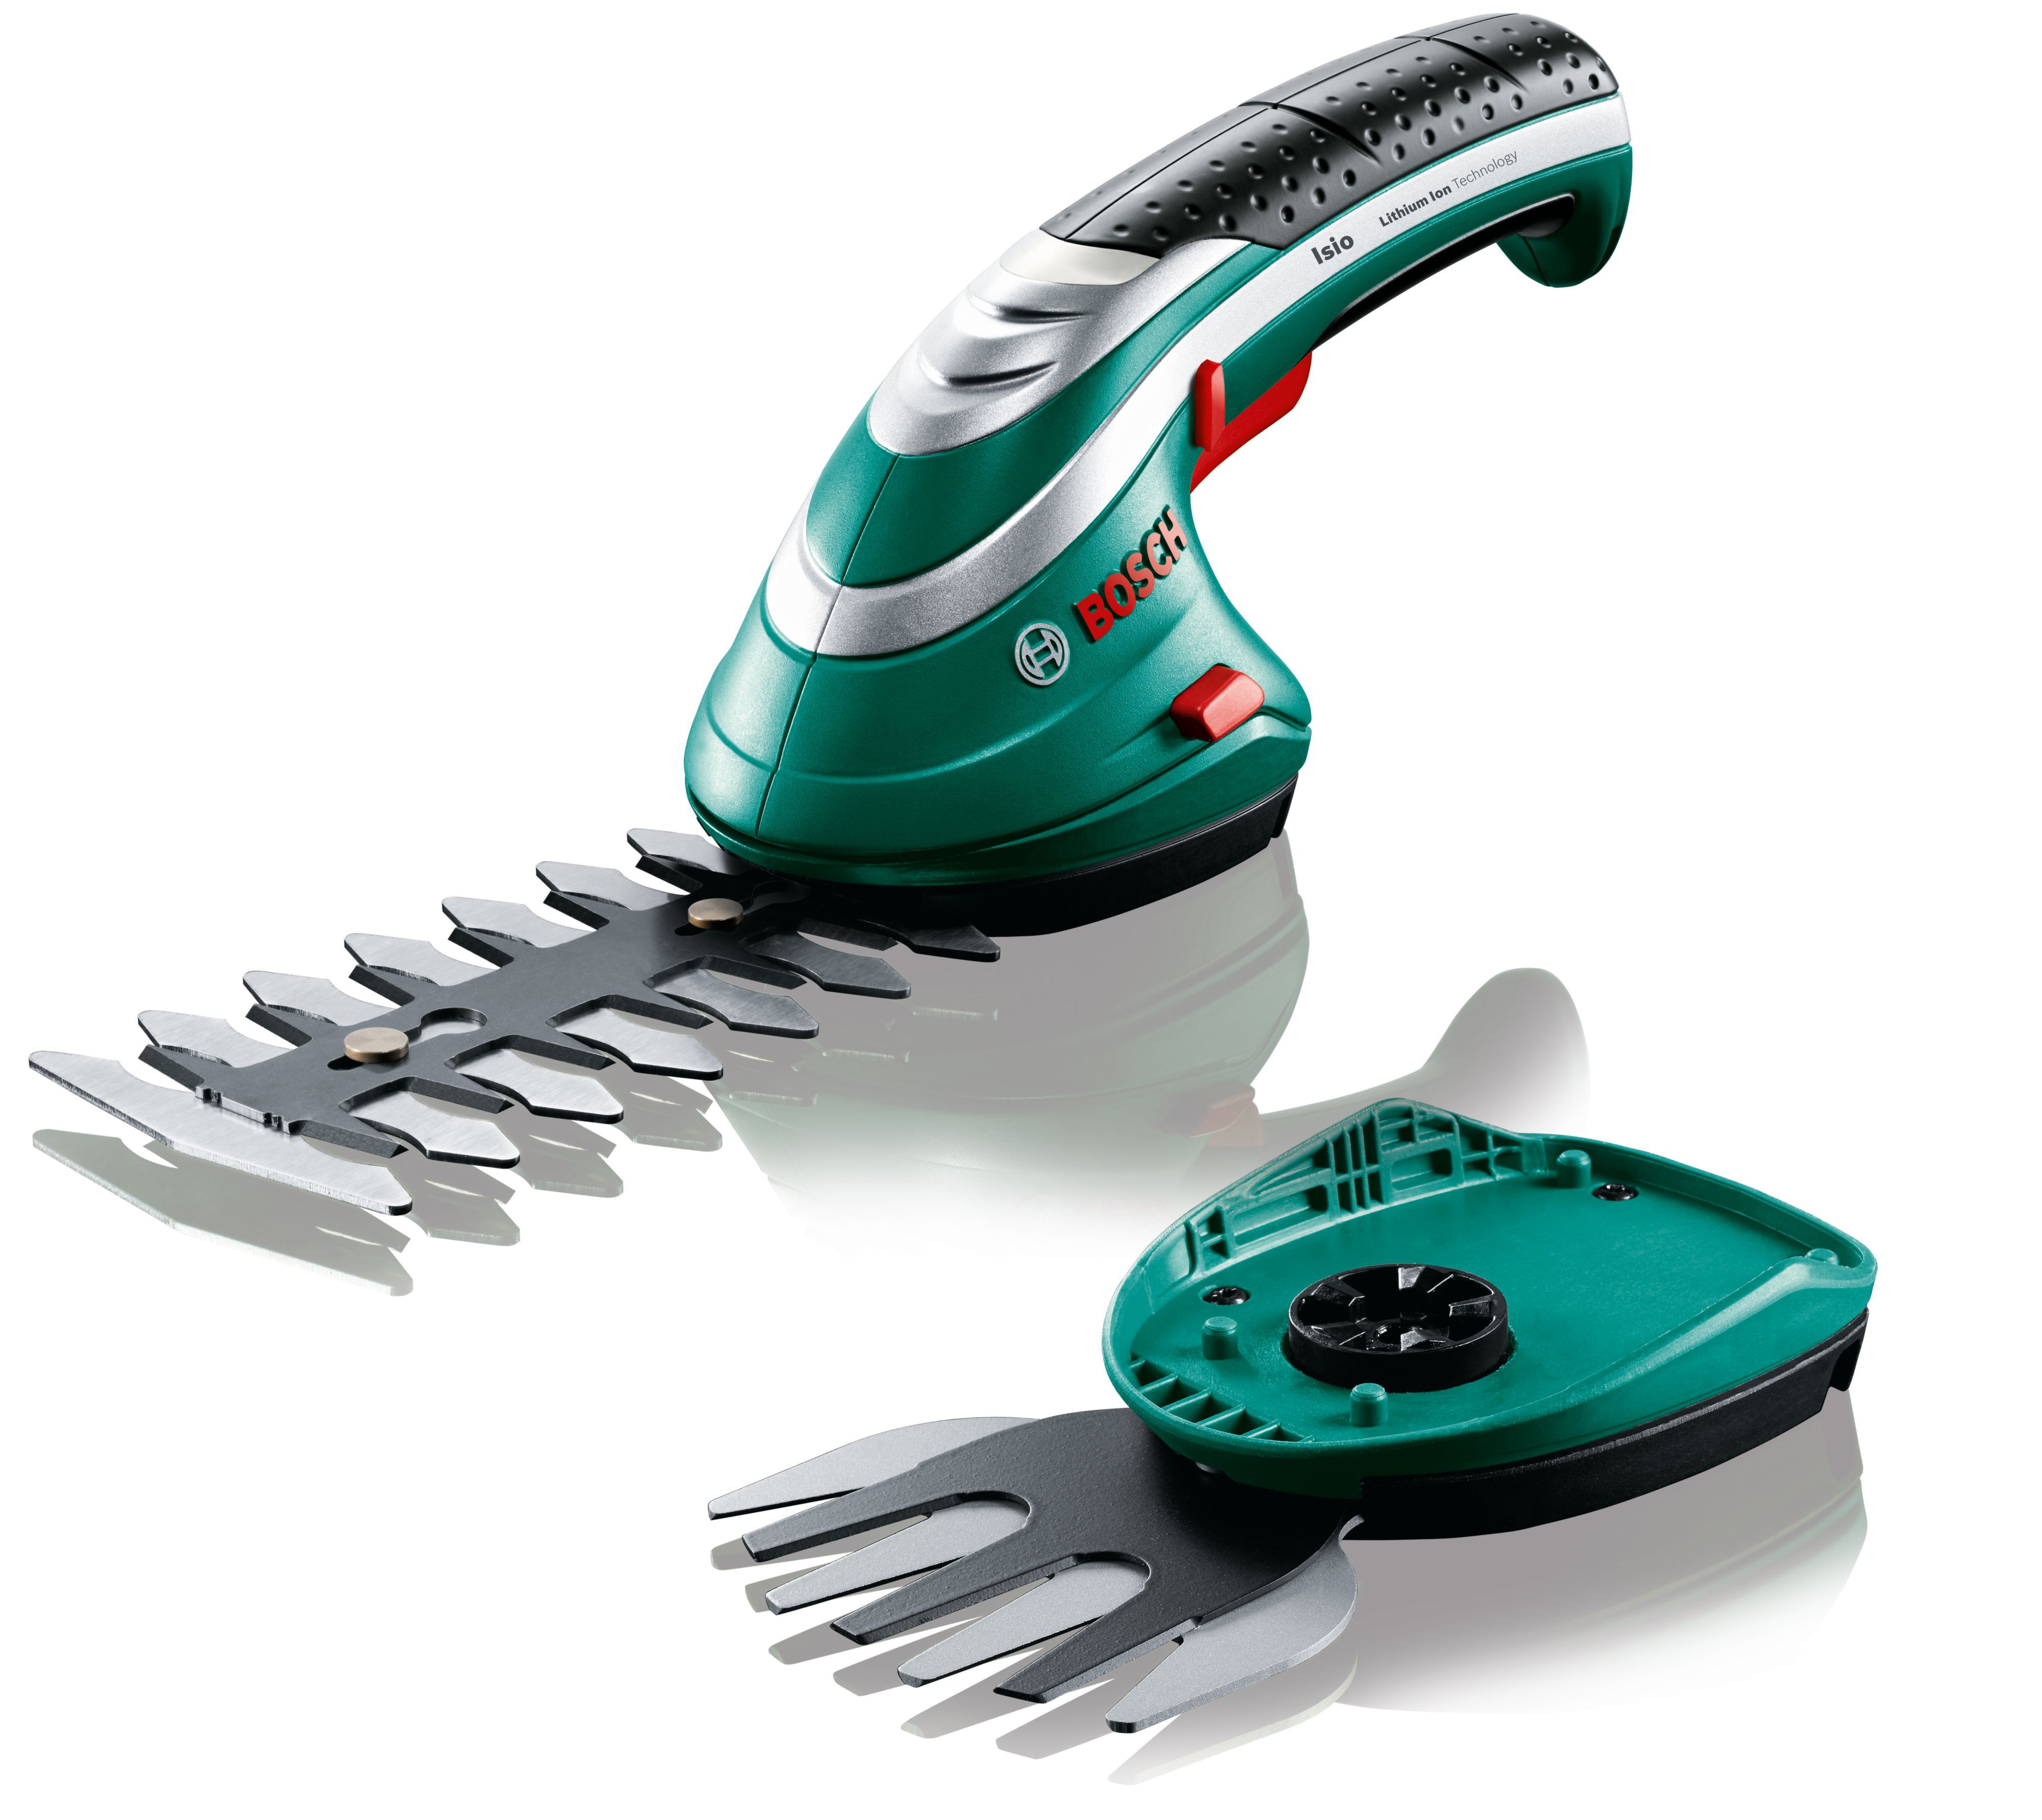 Bosch Isio 3.6V 120mm Cordless Hedge trimmer